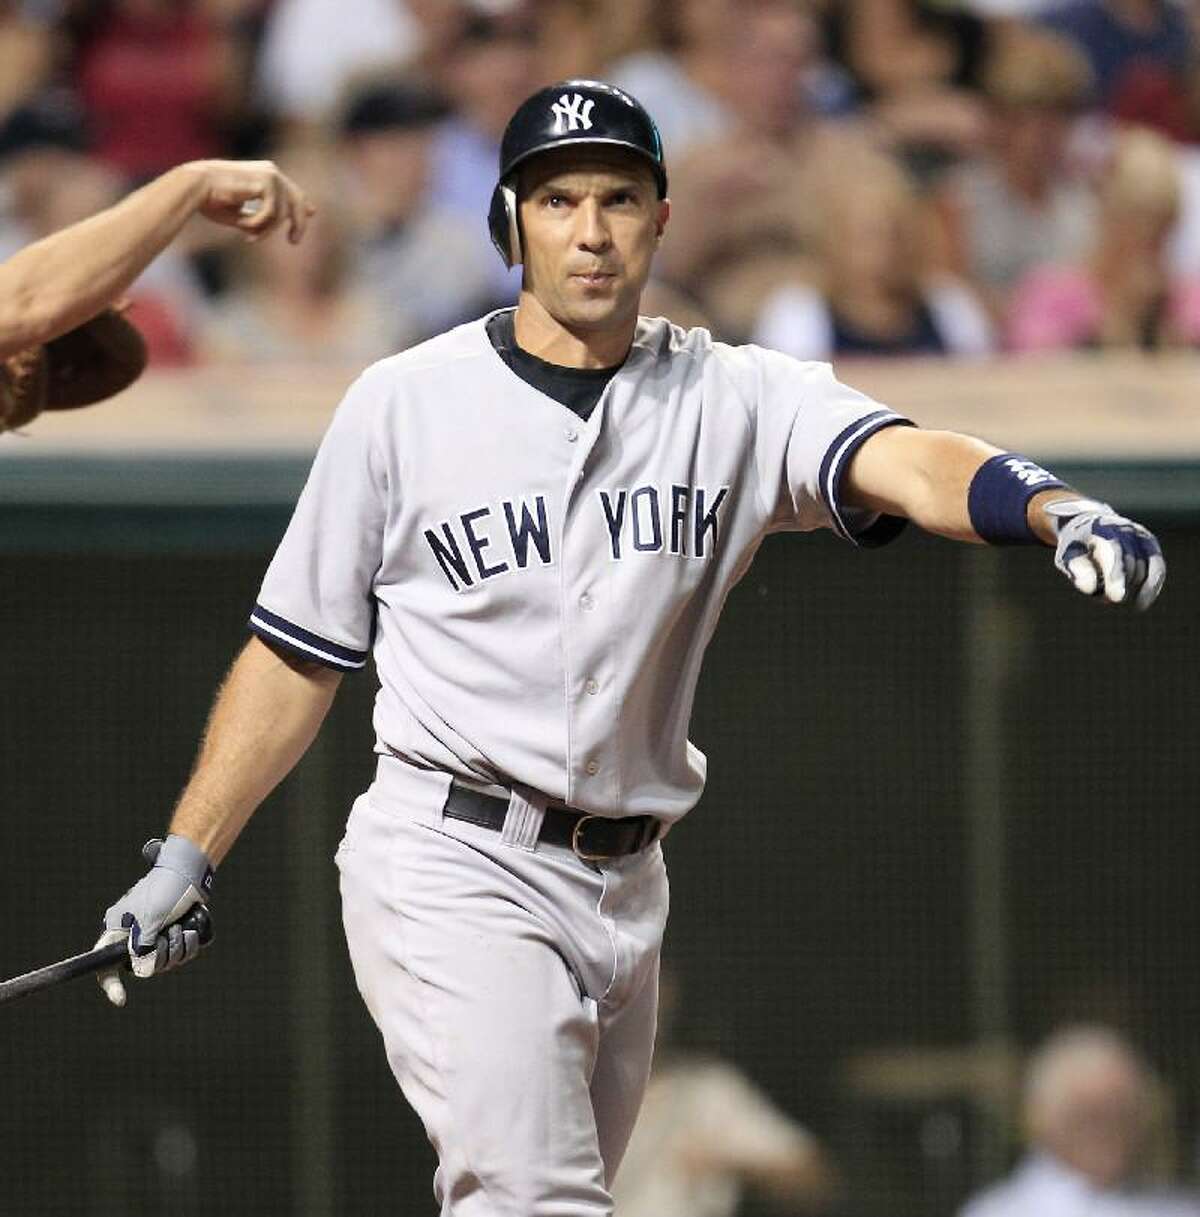 ASSOCIATED PRESS New York Yankees' Raul Ibanez reacts after striking out against Cleveland Indians relief pitcher Chris Perez in the ninth inning of Saturday night's game in Cleveland. The Yankees lost 3-1.